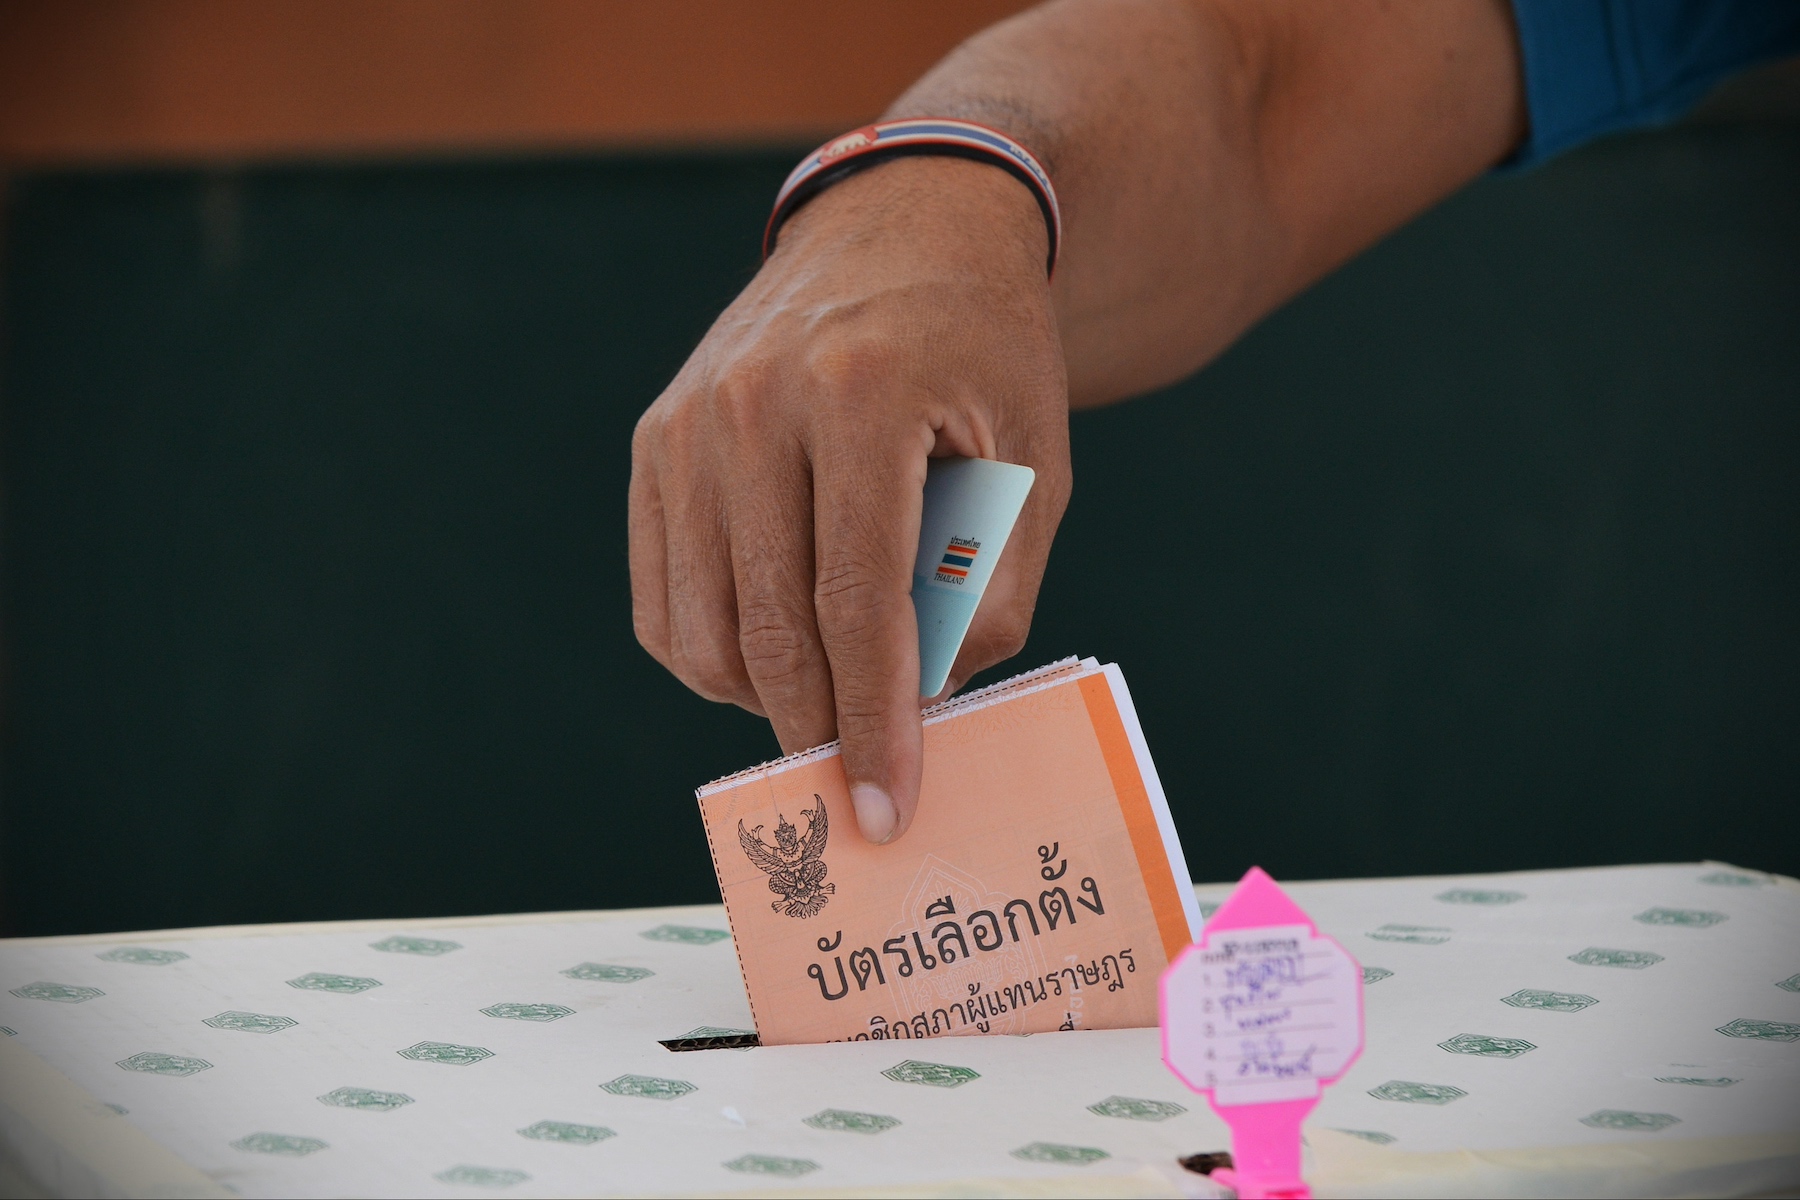 Close-up shot of a hand placing a paper ballot into a box during the Thai election